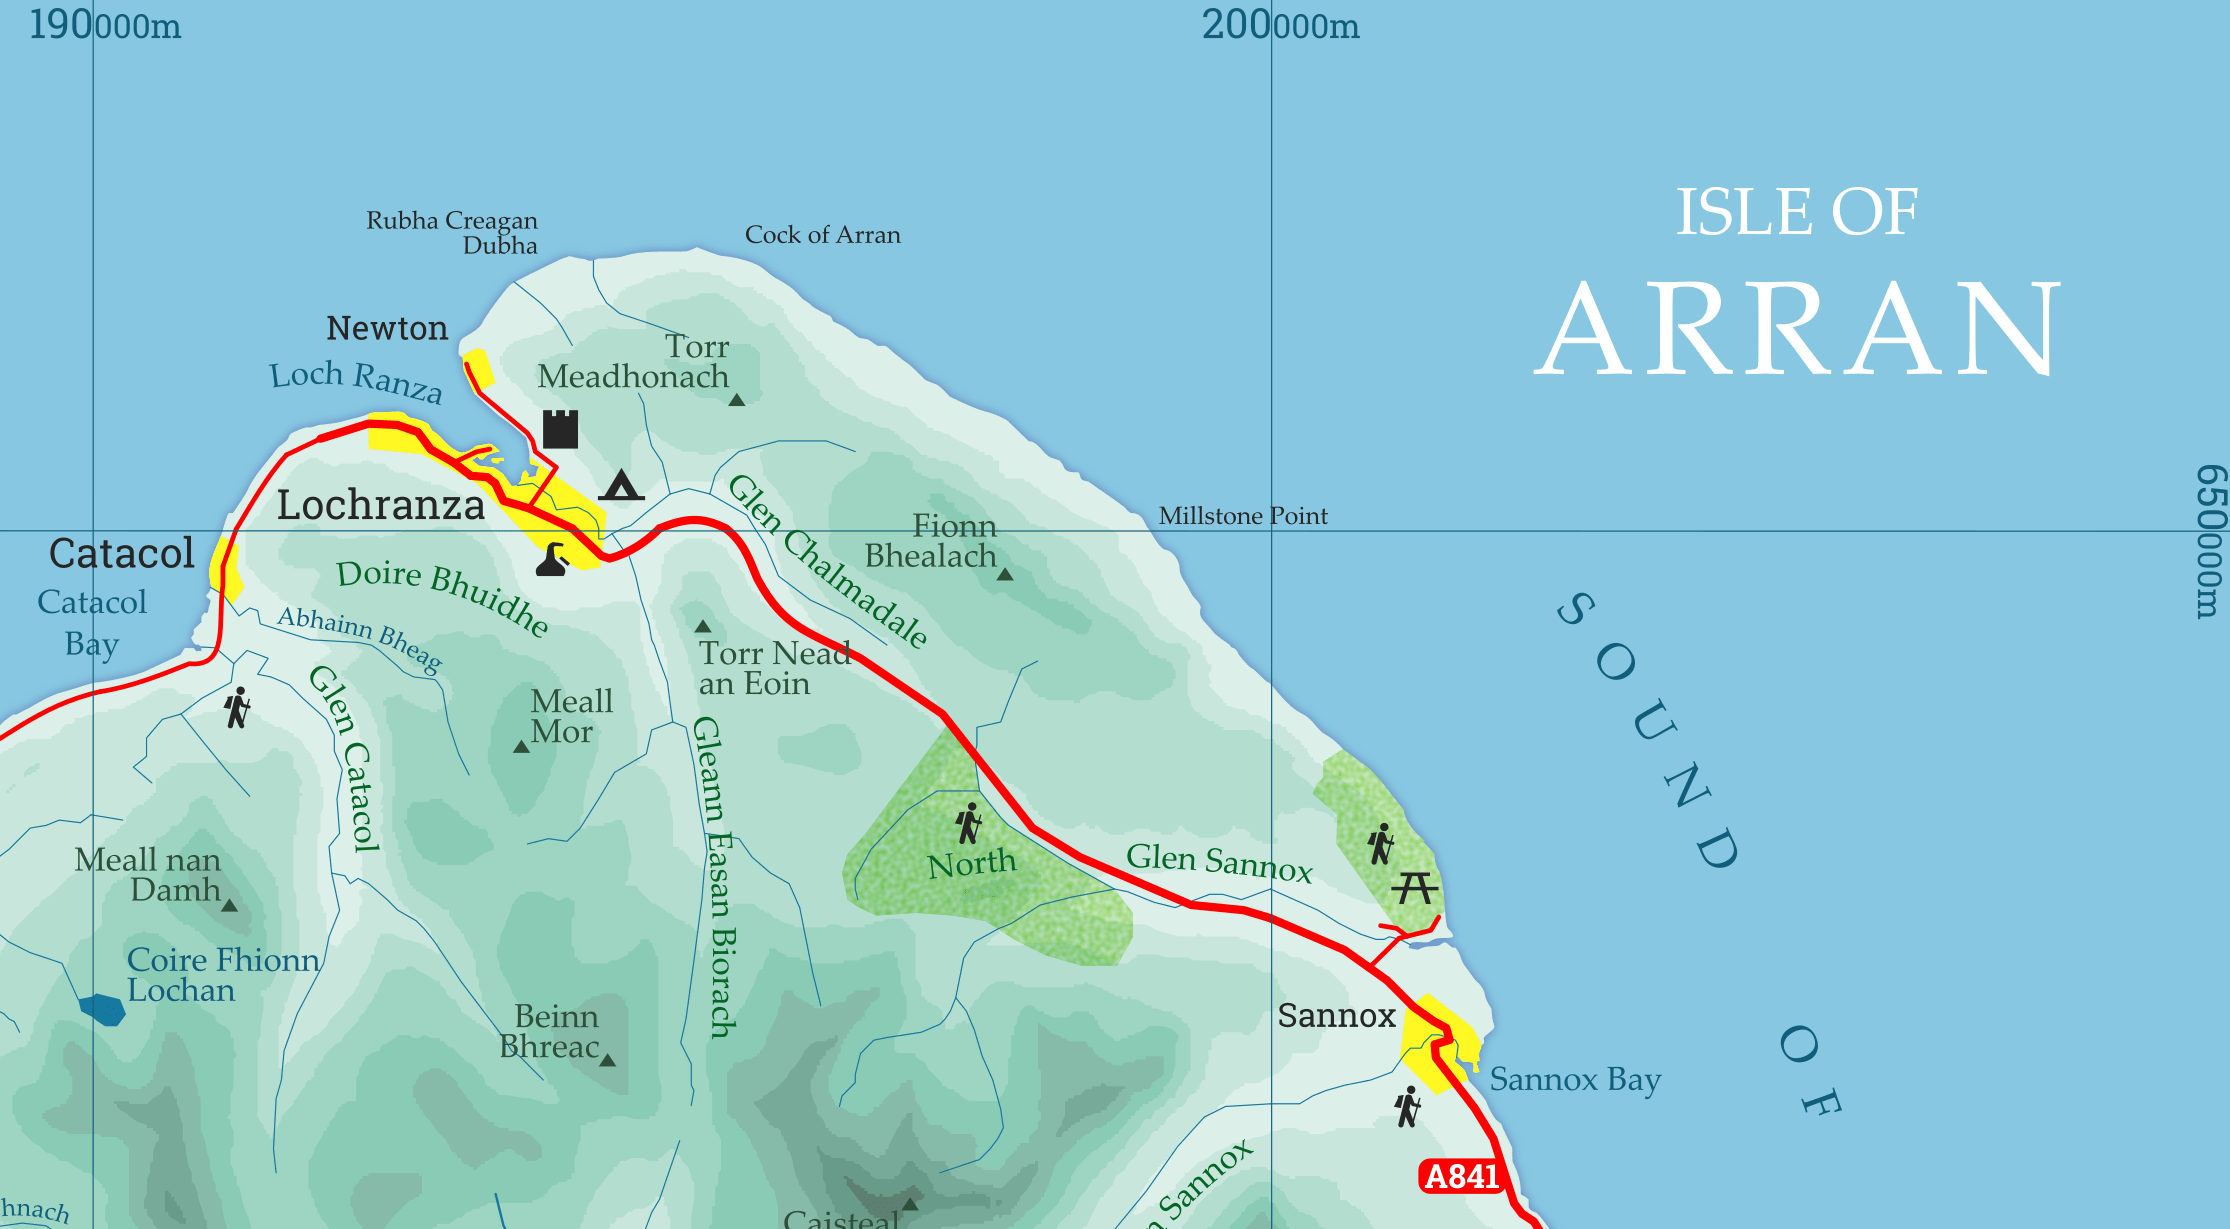 Cover Image for Arran topography